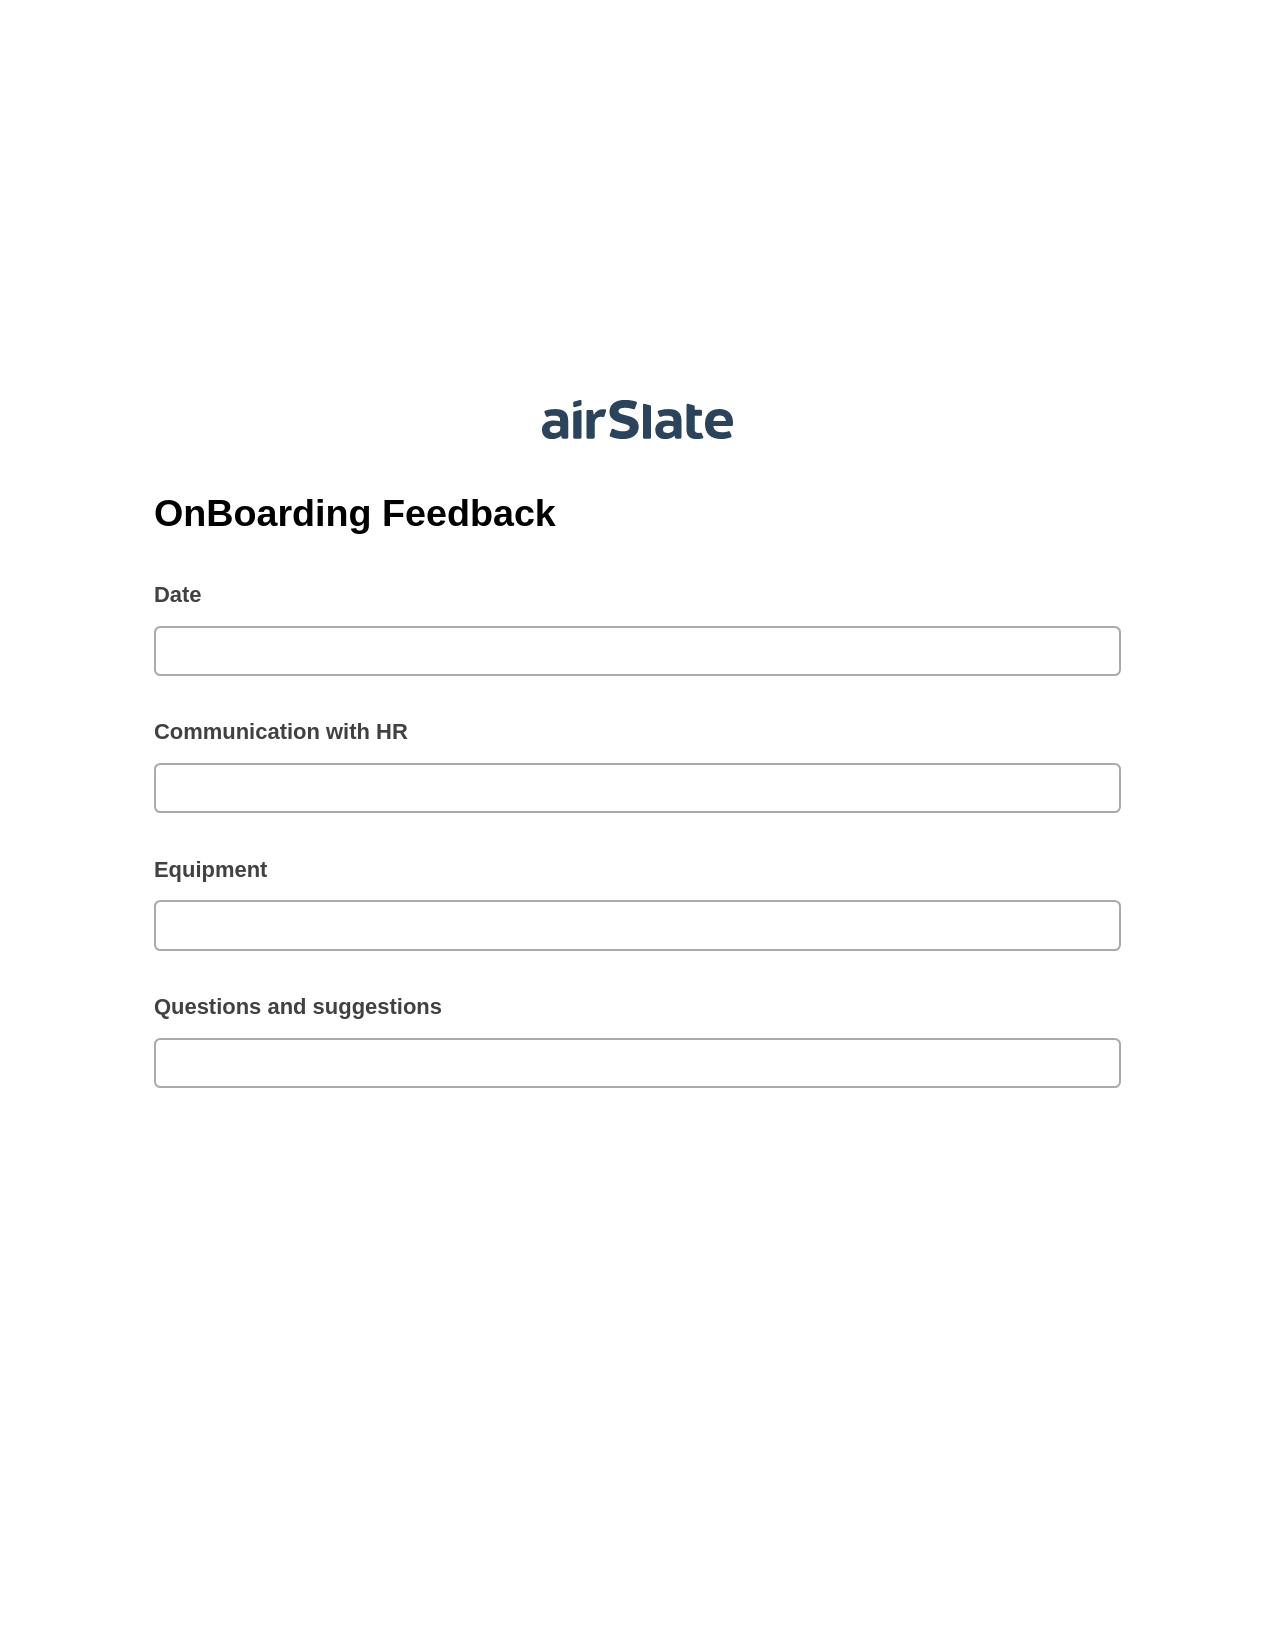 Multirole OnBoarding Feedback Pre-fill Slate from MS Dynamics 365 Records Bot, System Bot - Create a Slate in another Flow, Export to NetSuite Record Bot